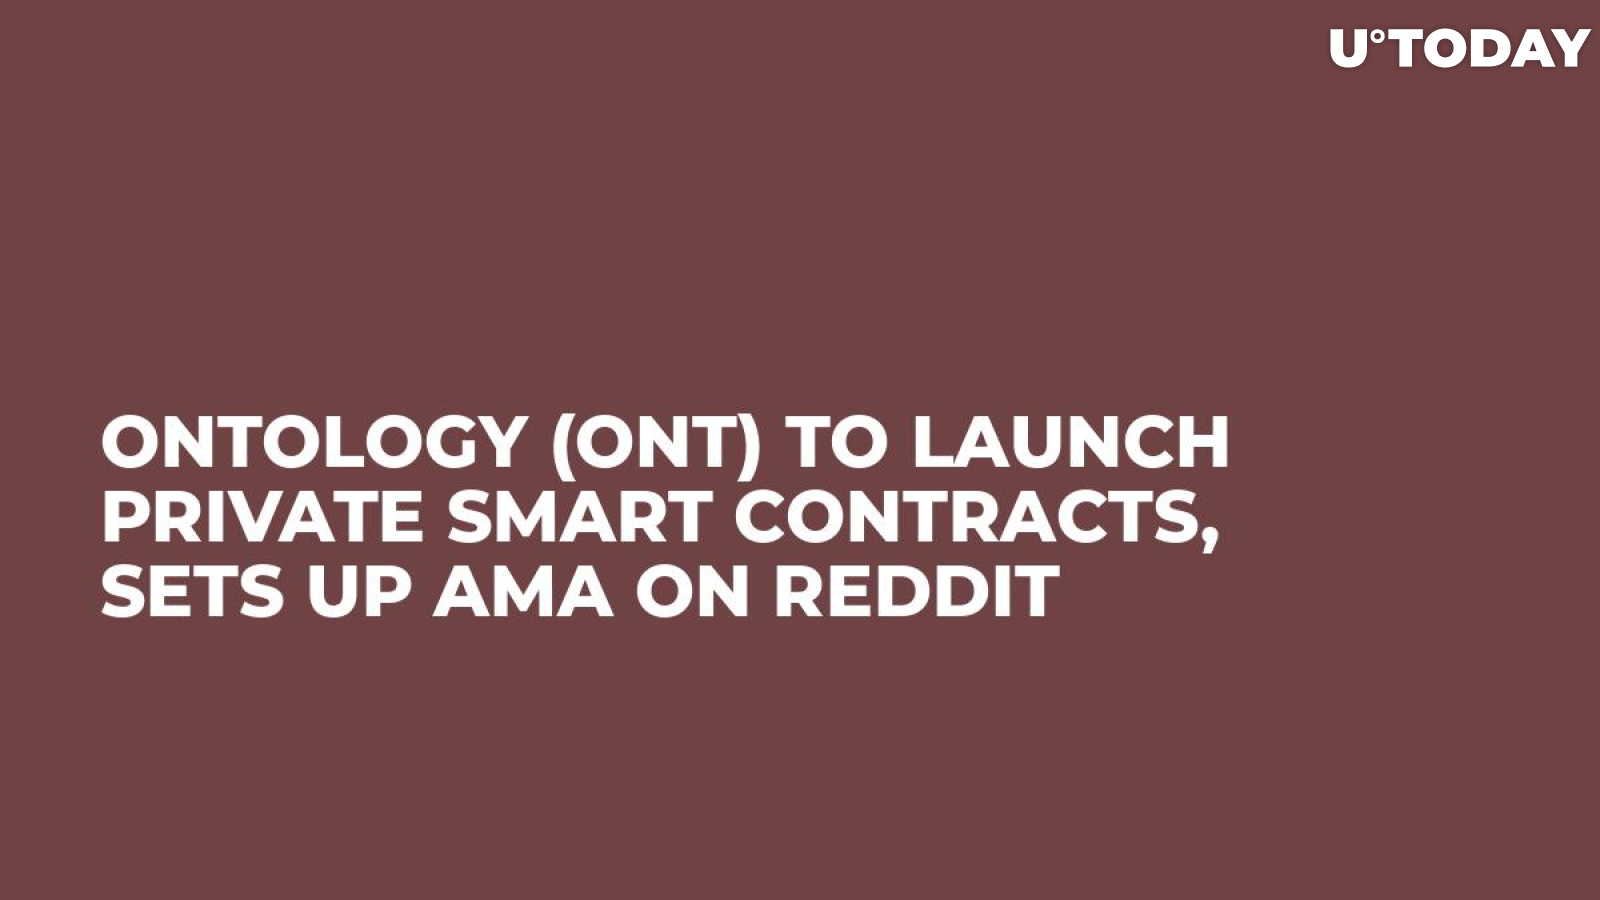 Ontology (ONT) to Launch Private Smart Contracts, Sets Up AMA on Reddit